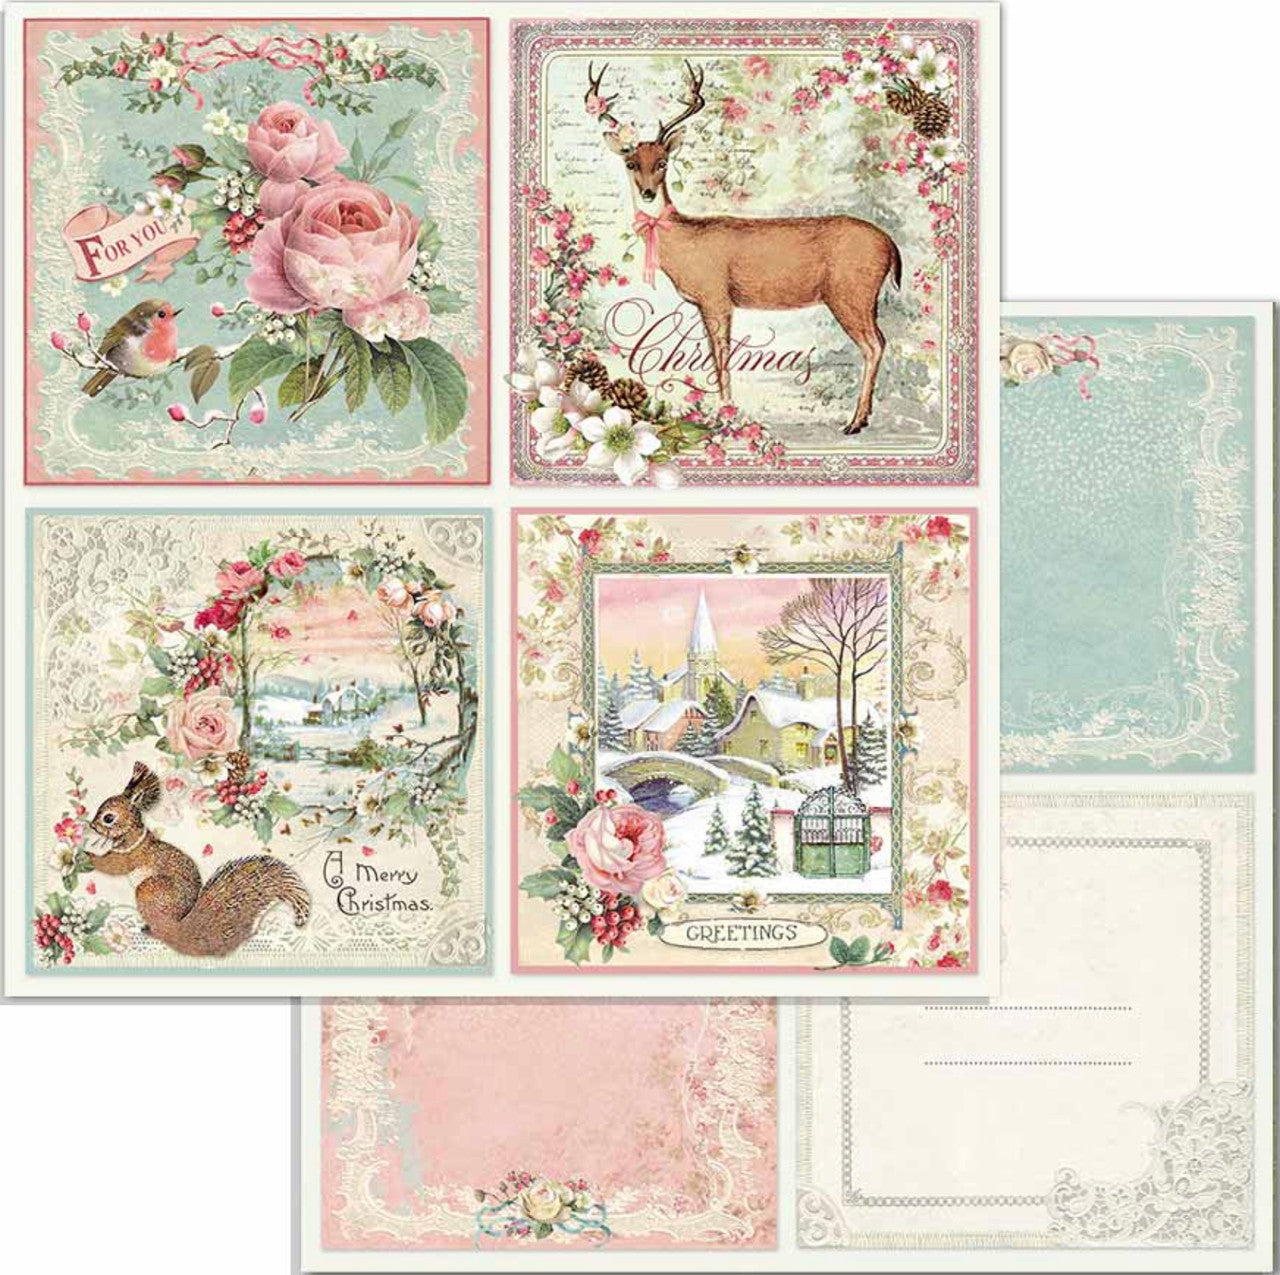 Stamperia Pink Christmas Double Faced Paper Pack 6” x 6”